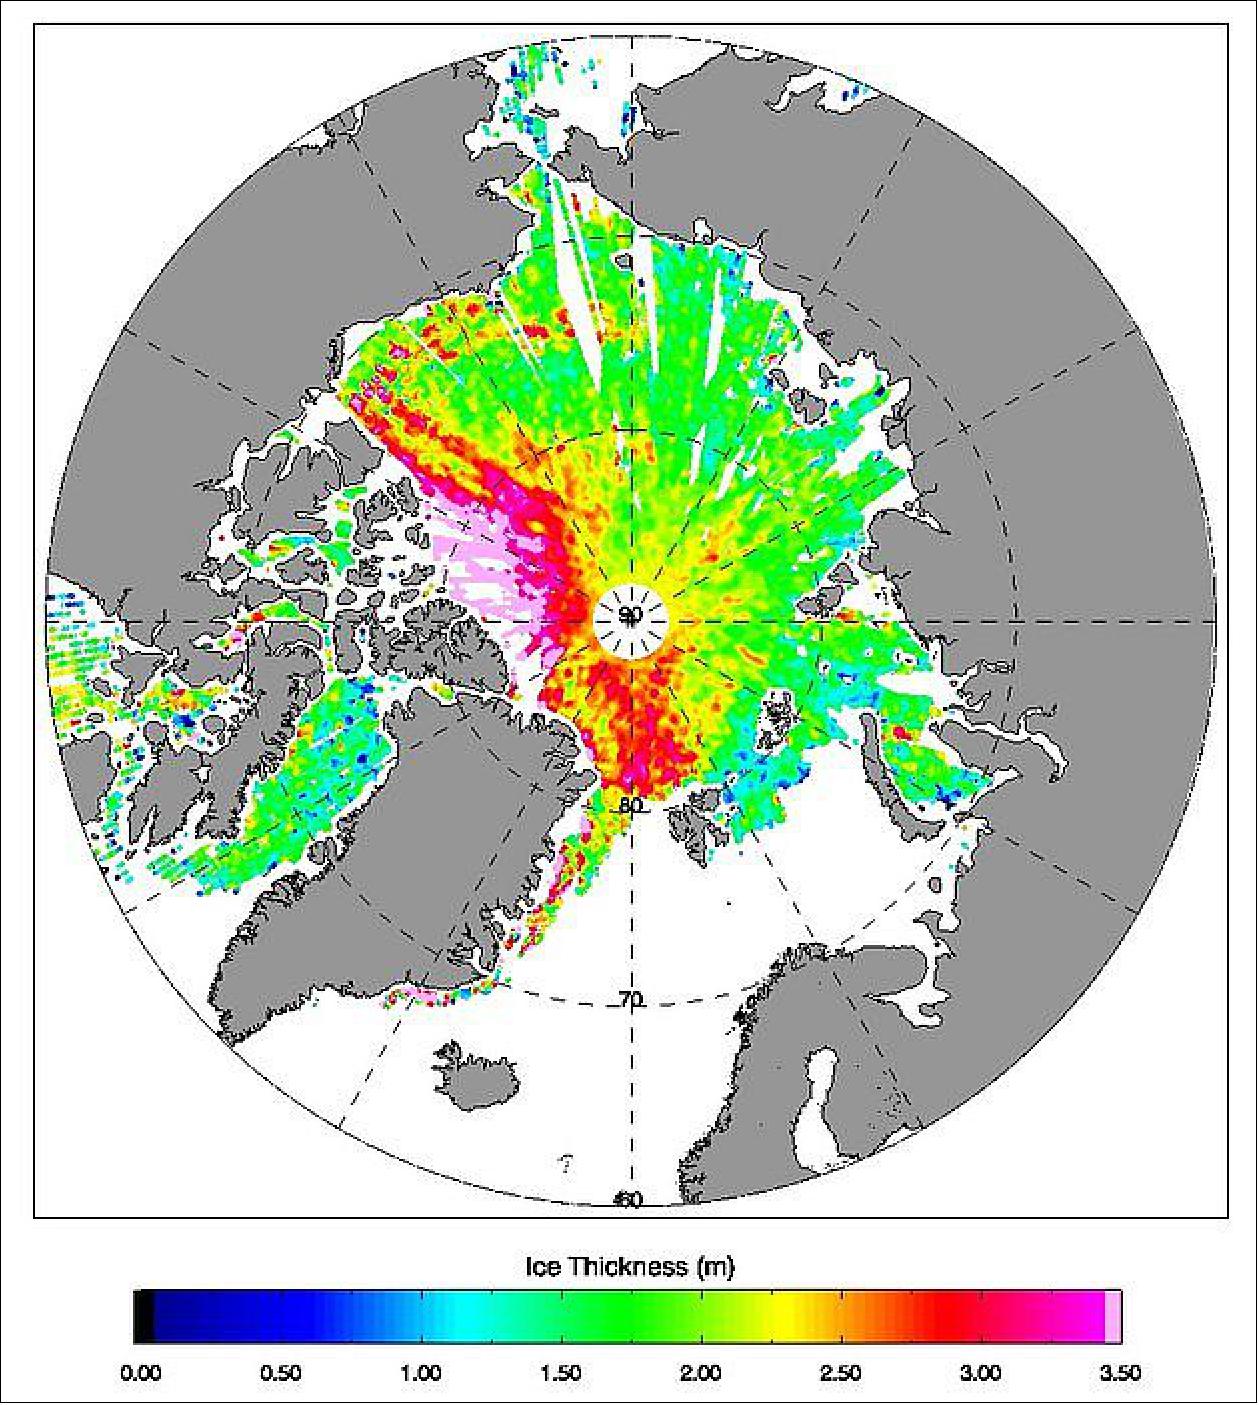 Figure 69: This image demonstrates the latest 28-day (18 March to 14 April 2015) Arctic sea-ice thickness measurements from CryoSat-2. The interactive map of CPOM allows users to zoom in on various regions of the Arctic for a closer look at ice thickness(Ref. 78), image credit: ESA, CPOM